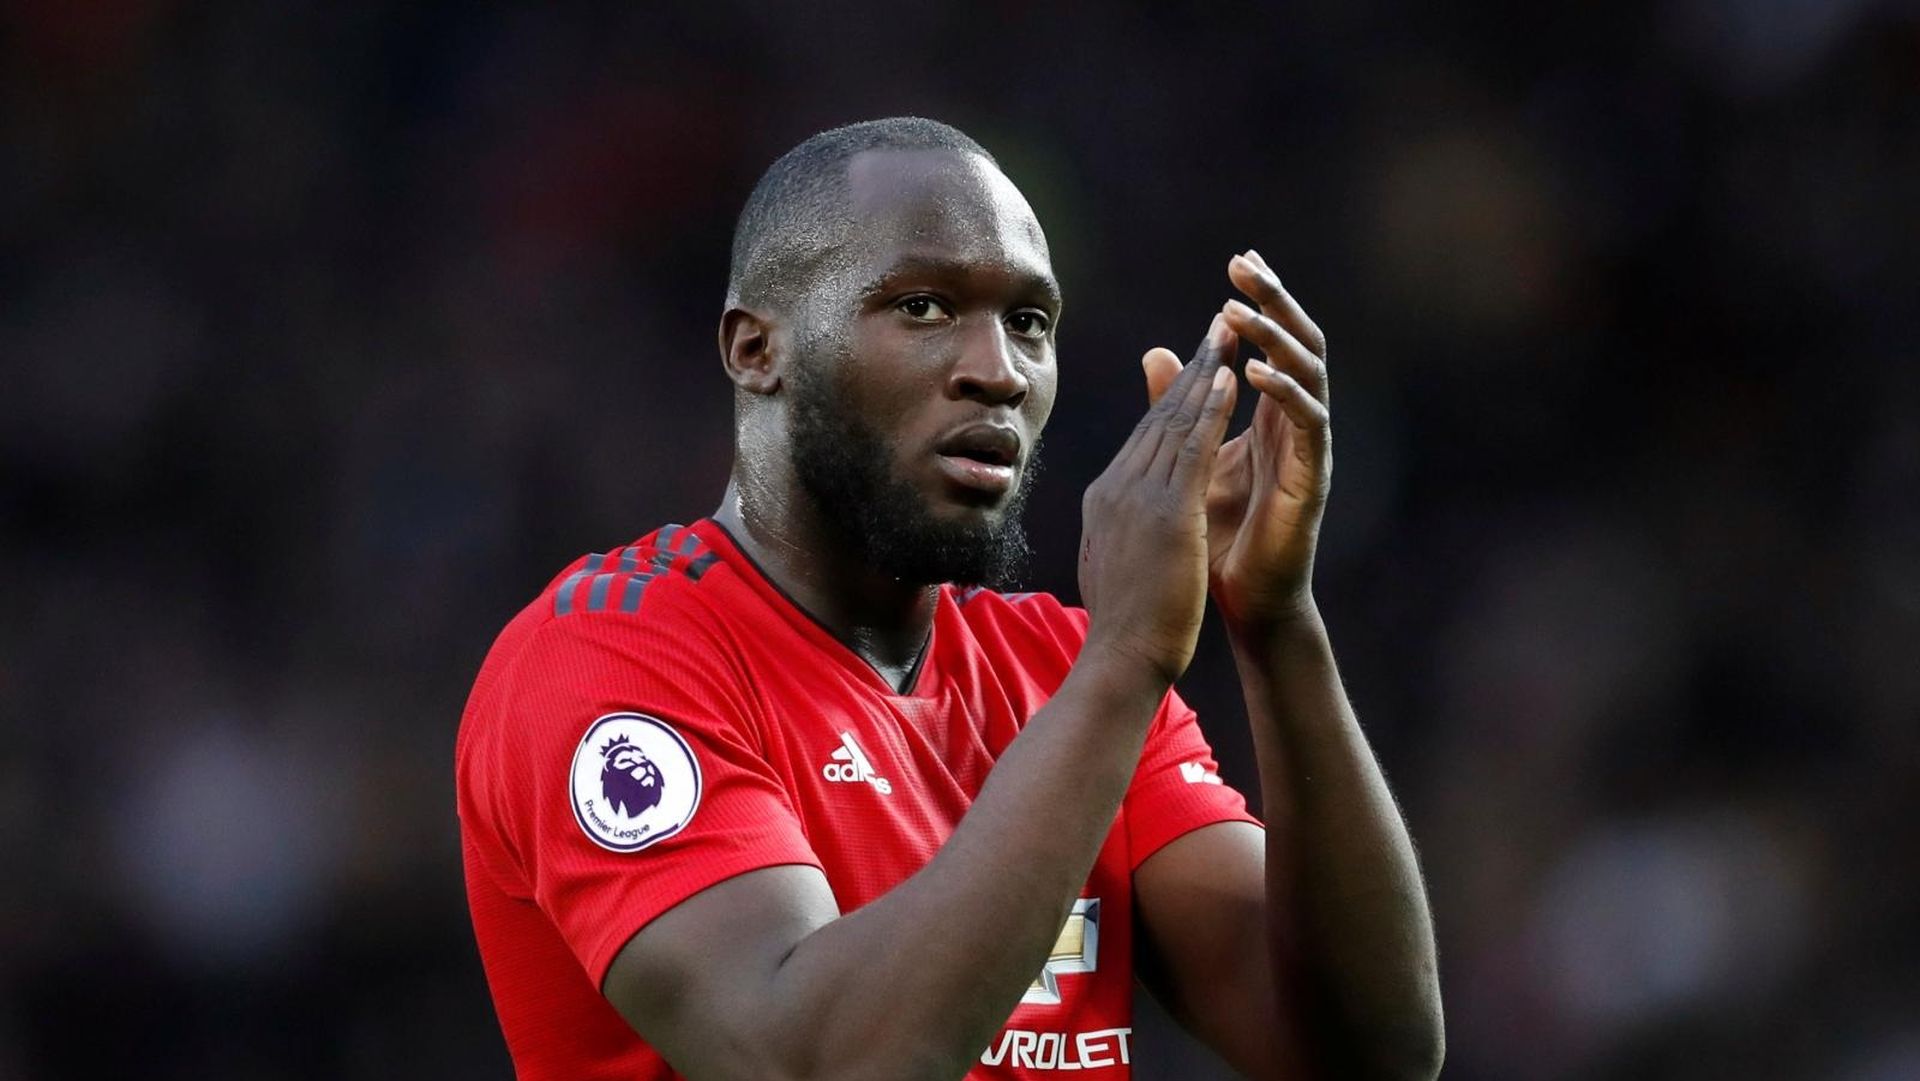 Premier League - Manchester United v Southampton Soccer Football - Premier League - Manchester United v Southampton - Old Trafford, Manchester, Britain - March 2, 2019  Manchester United's Romelu Lukaku applauds fans after the match   Action Images via Reuters/Carl Recine  EDITORIAL USE ONLY. No use with unauthorized audio, video, data, fixture lists, club/league logos or "live" services. Online in-match use limited to 75 images, no video emulation. No use in betting, games or single club/league/player publications.  Please contact your account representative for further details. CARL RECINE